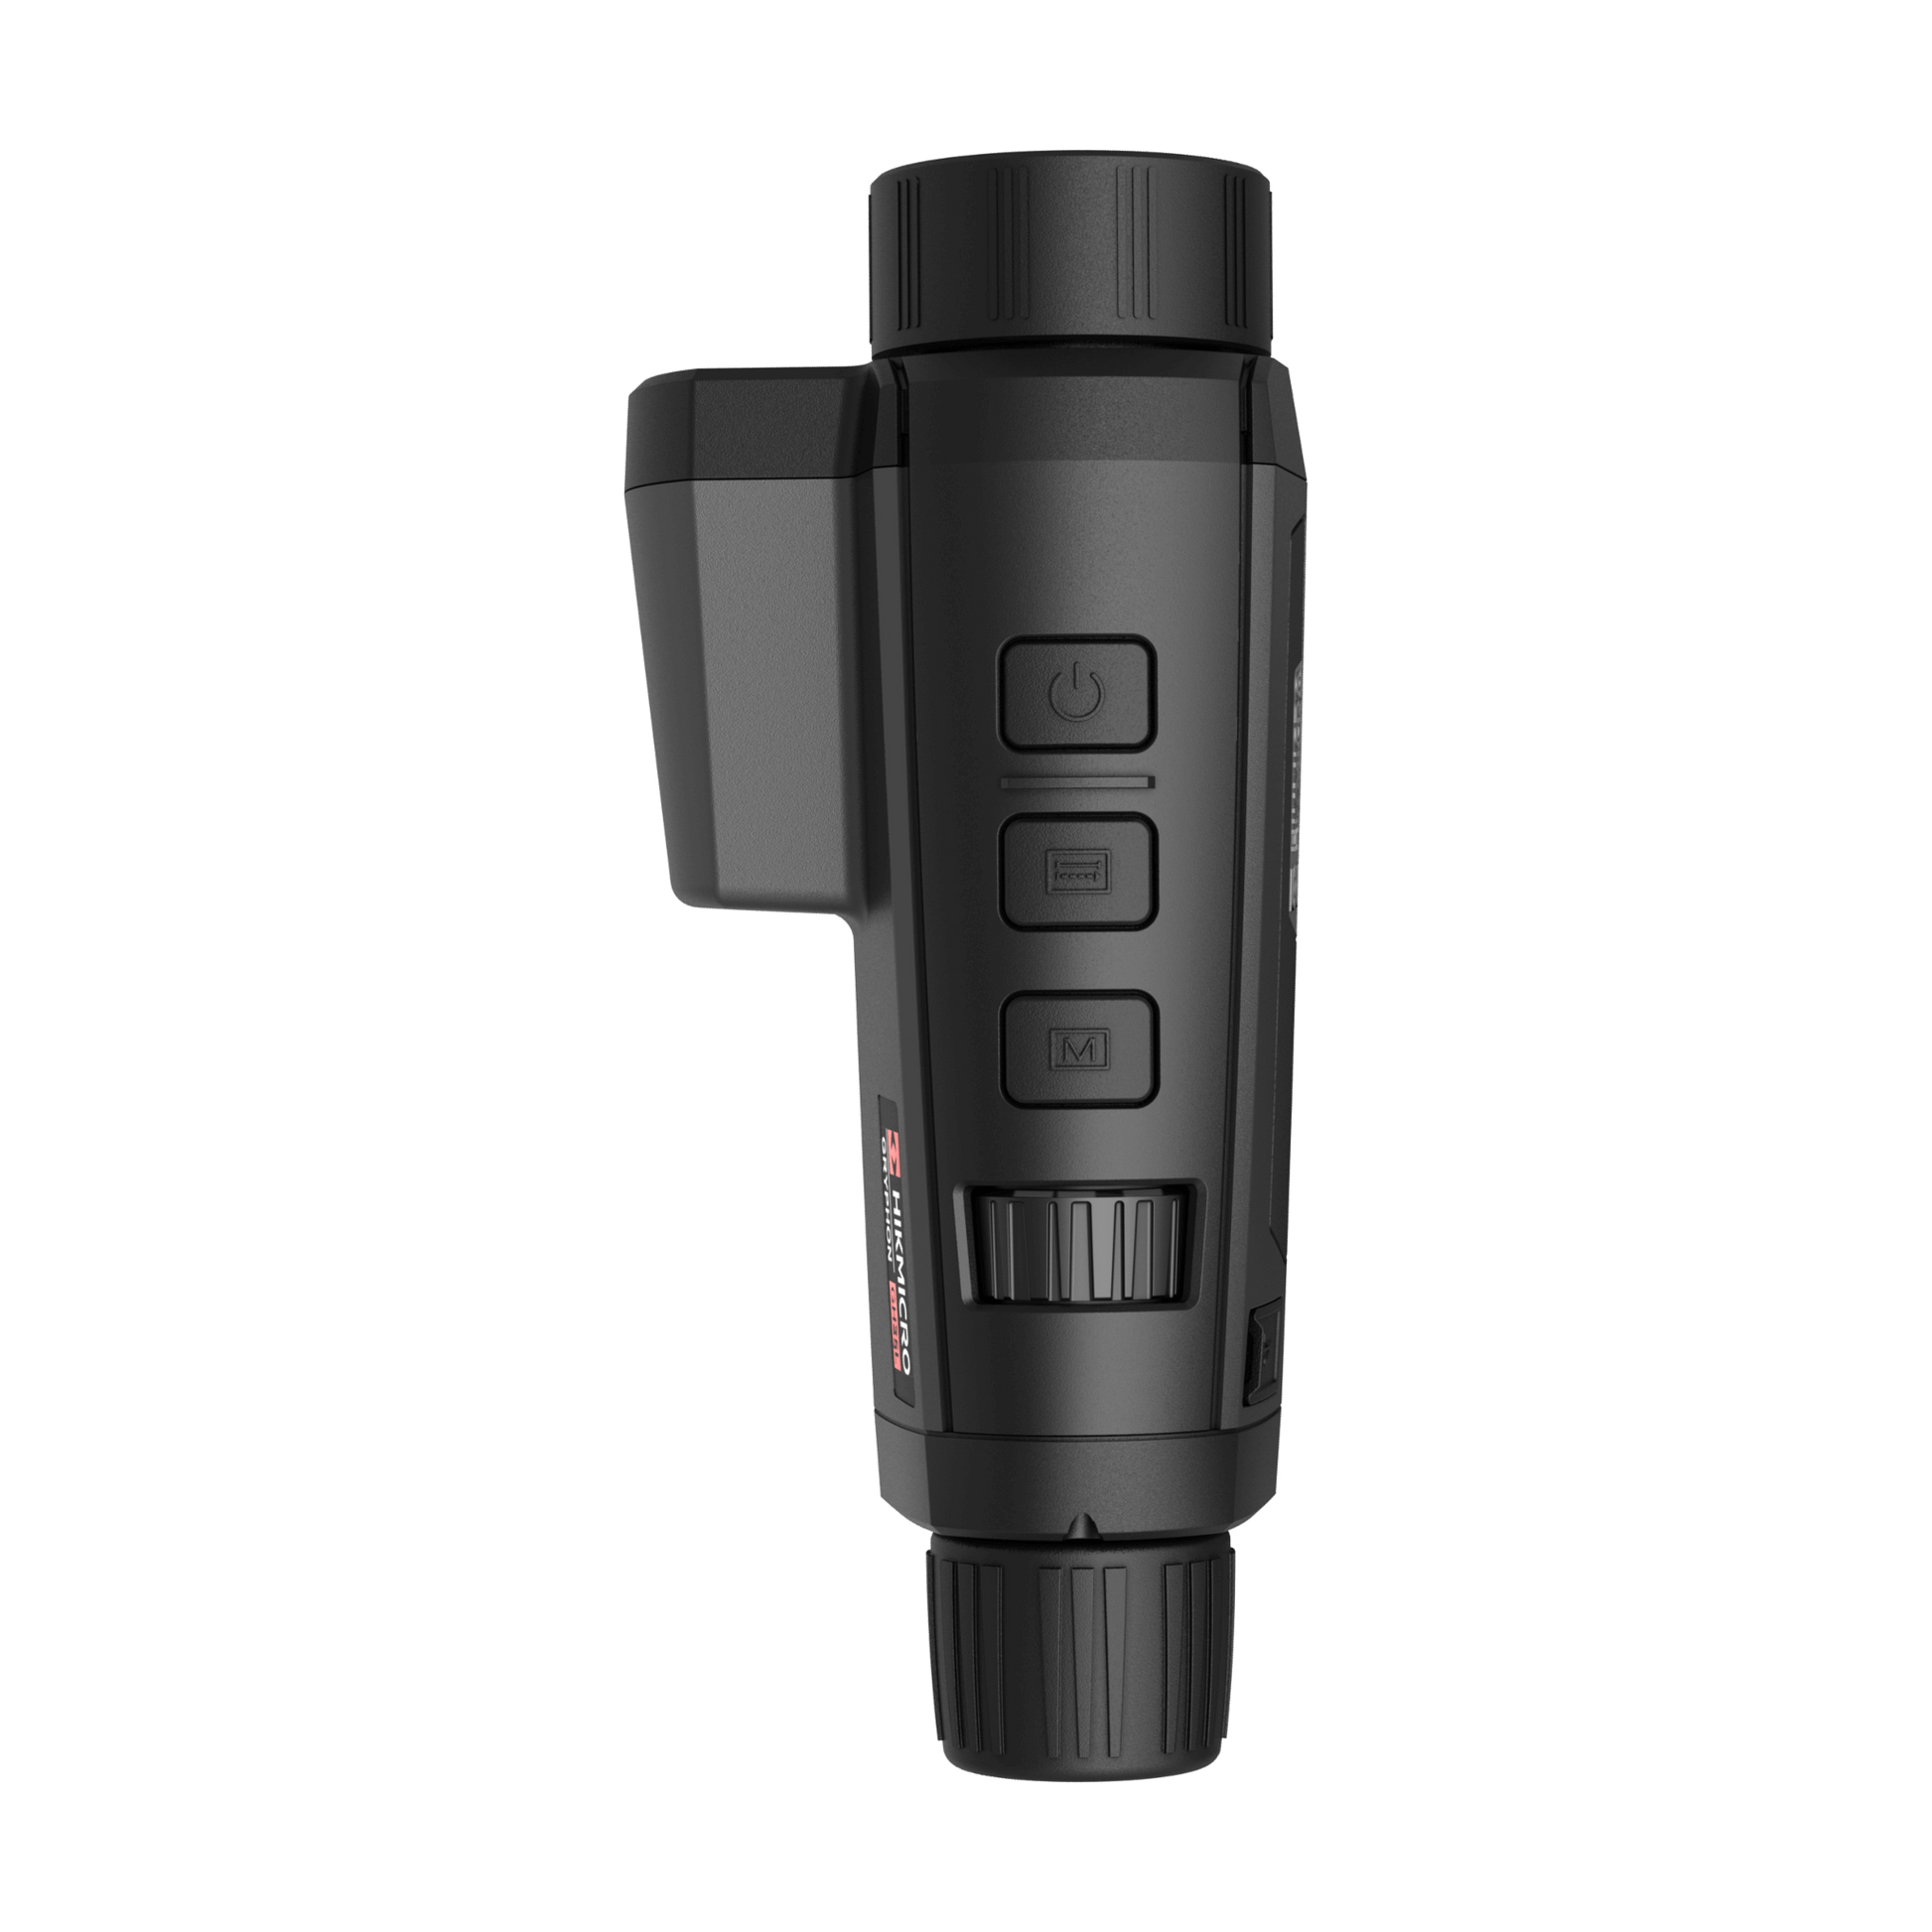 Cape Thermal imaging monocular for sale - HikMicro Gryphon GH35L Handheld thermal monocular top view